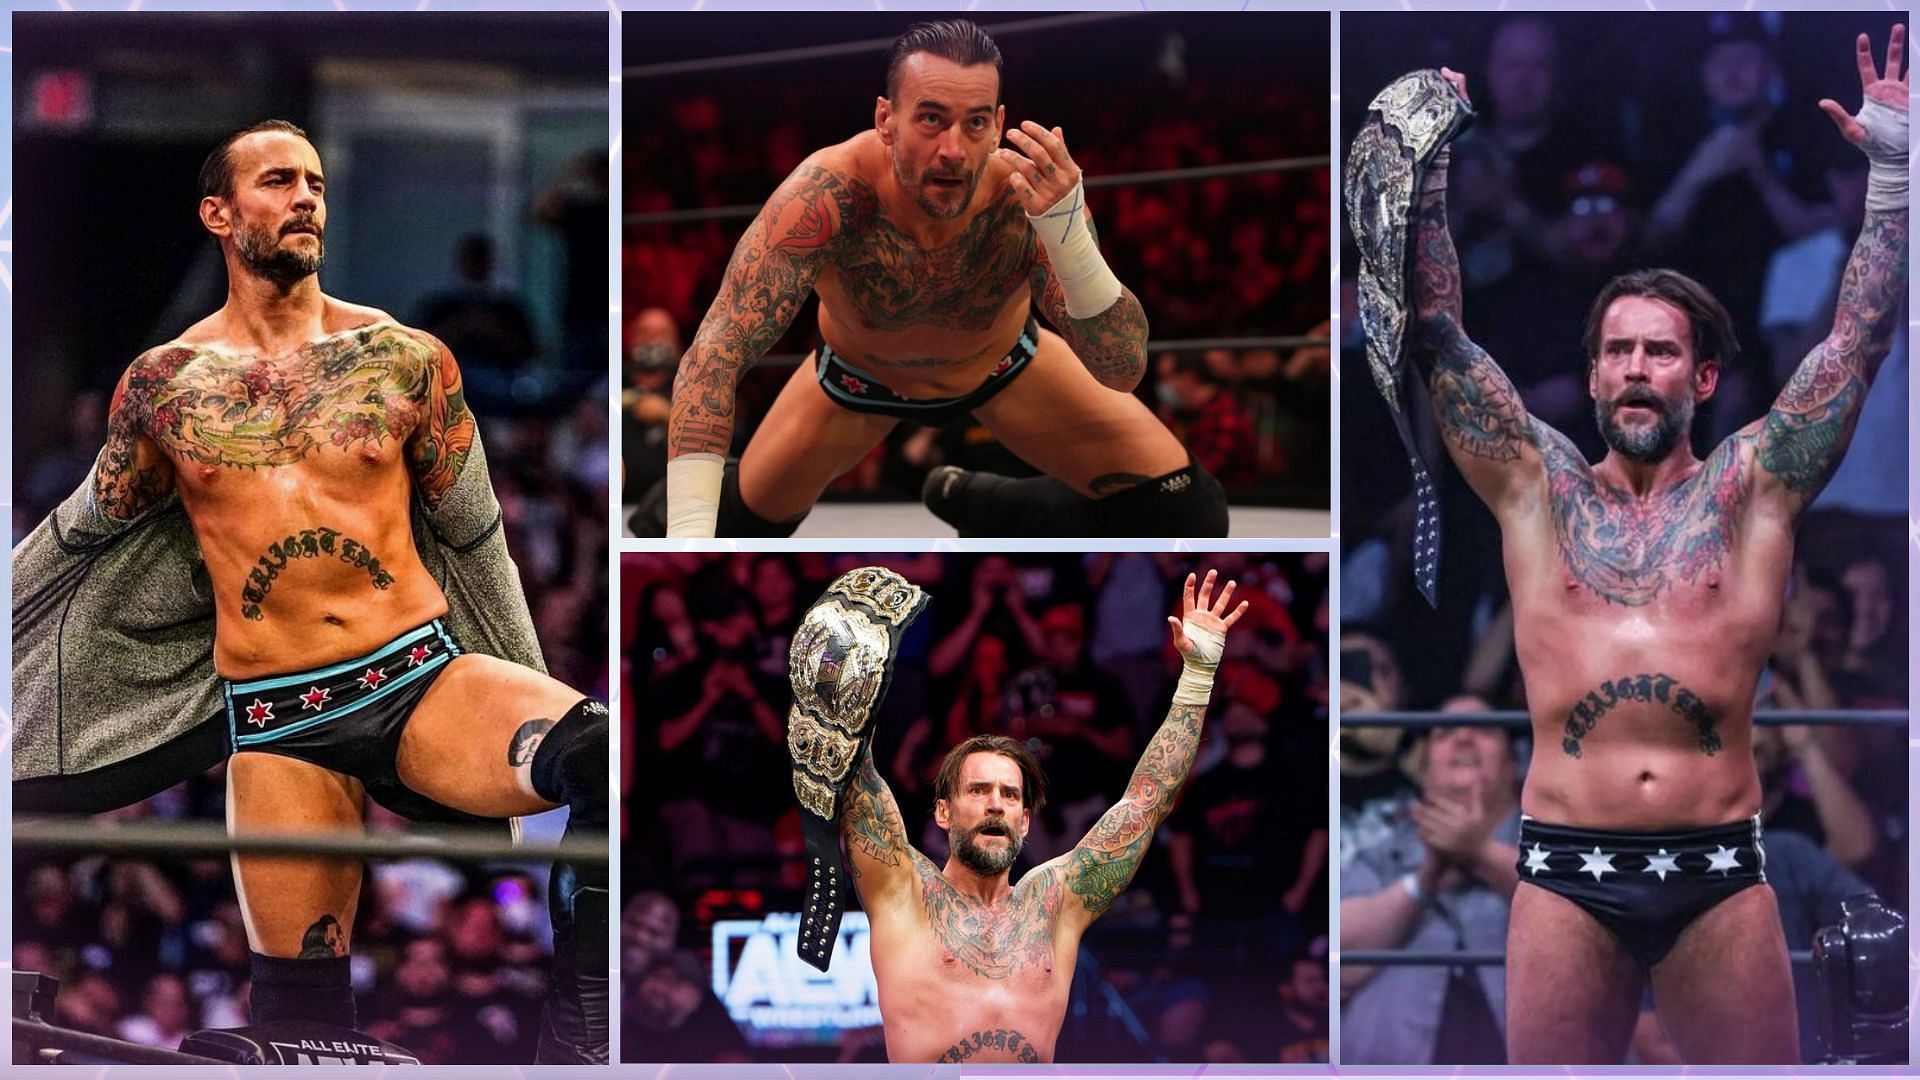 CM Punk returned to AEW after seven years of hiatus from wrestling